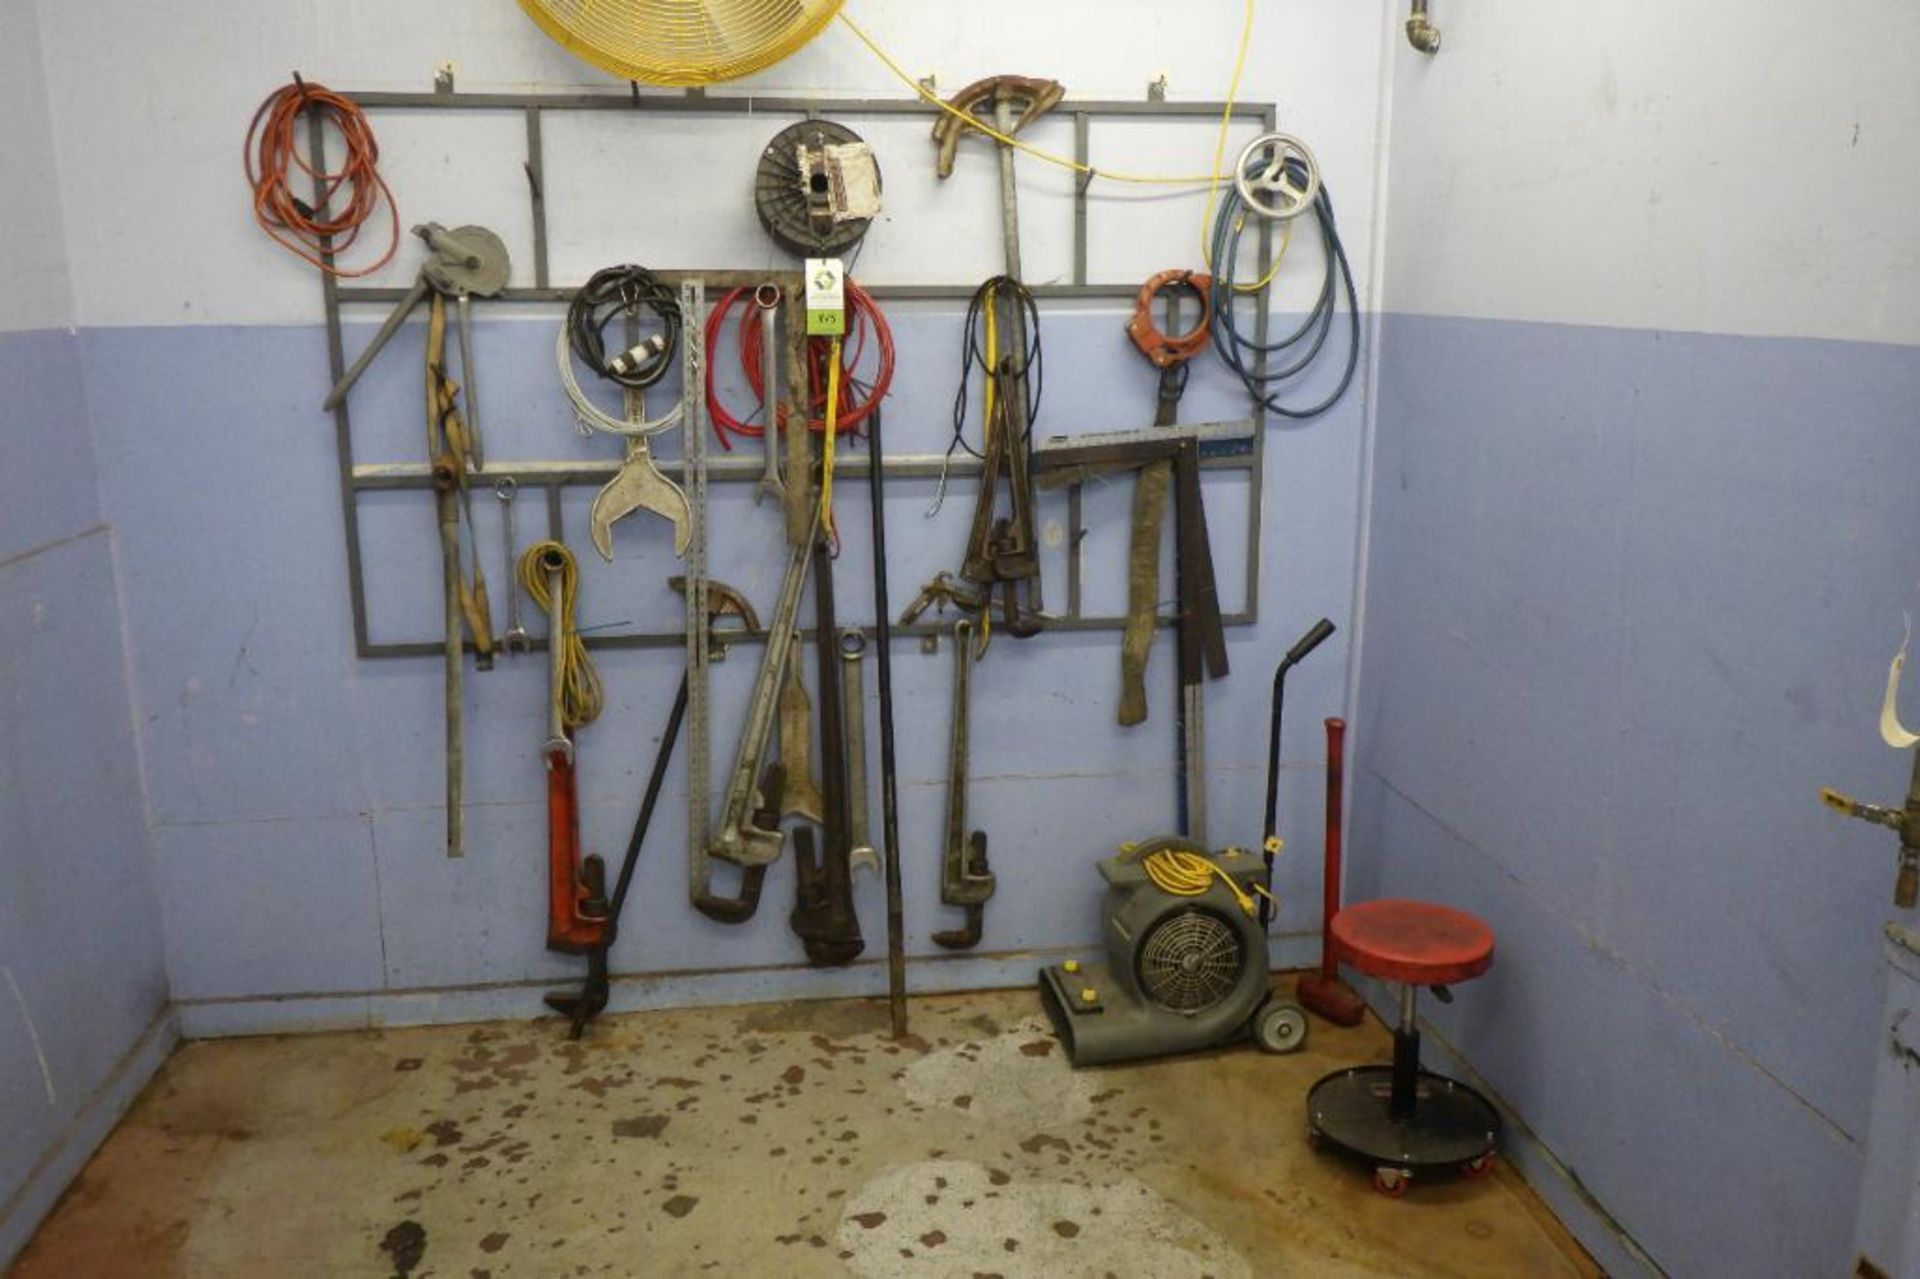 Assorted tools hanging on wall